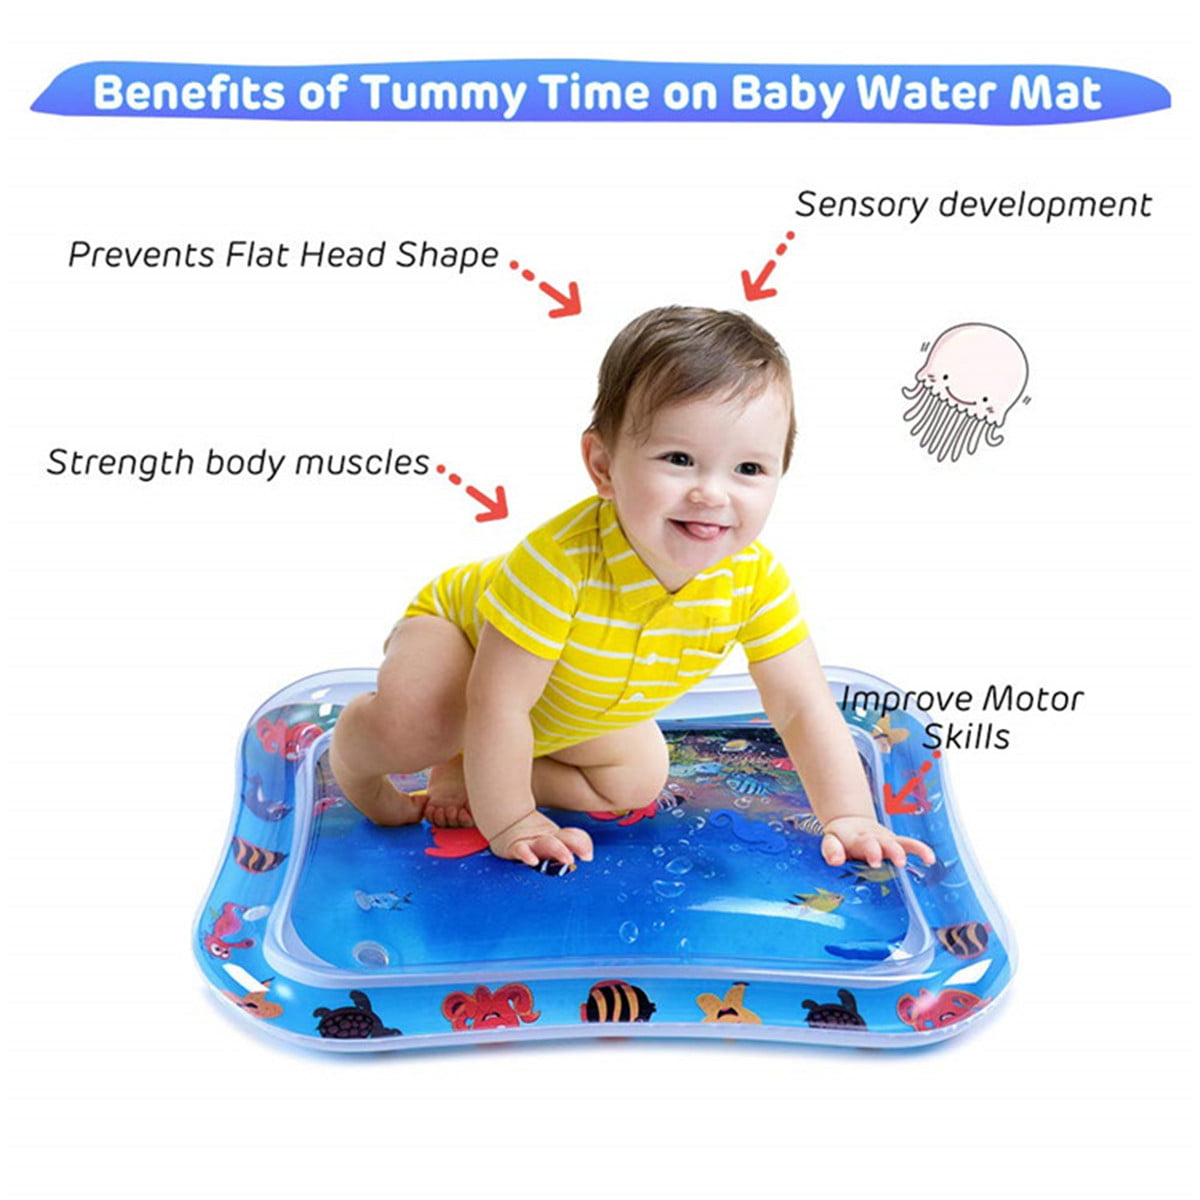 LANKEE Inflatable Tummy Time Water Play Mat for Infants and Toddlers Fun Tummy Time Toy for Infant Early Development Activity Centers and Babys Stimulation Growth 